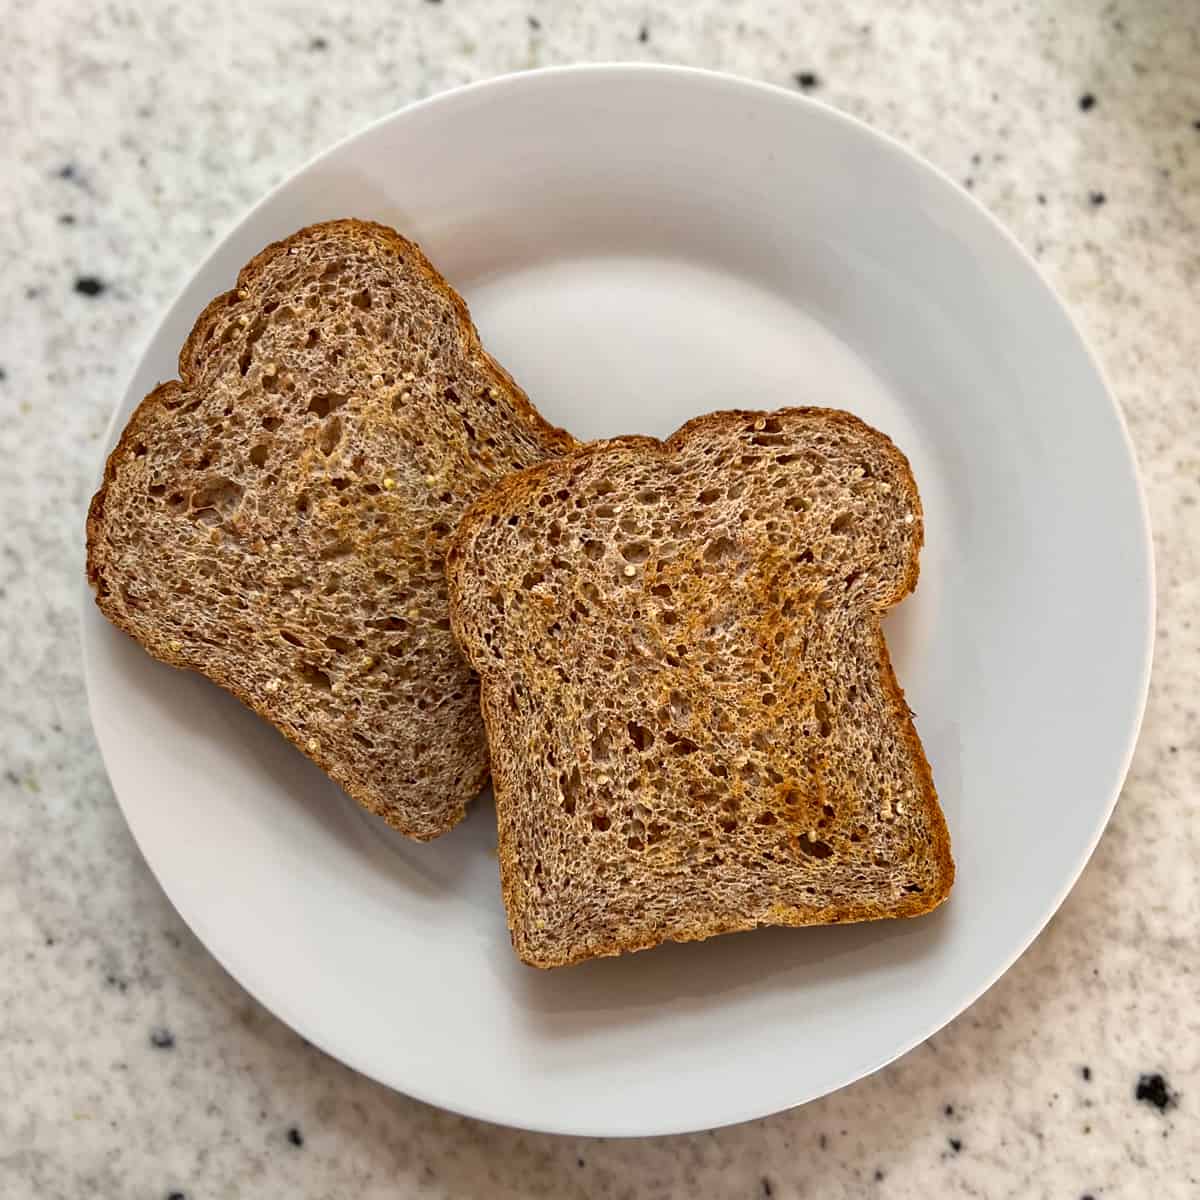 Two slices of toasted sprouted grain bread on a plate.